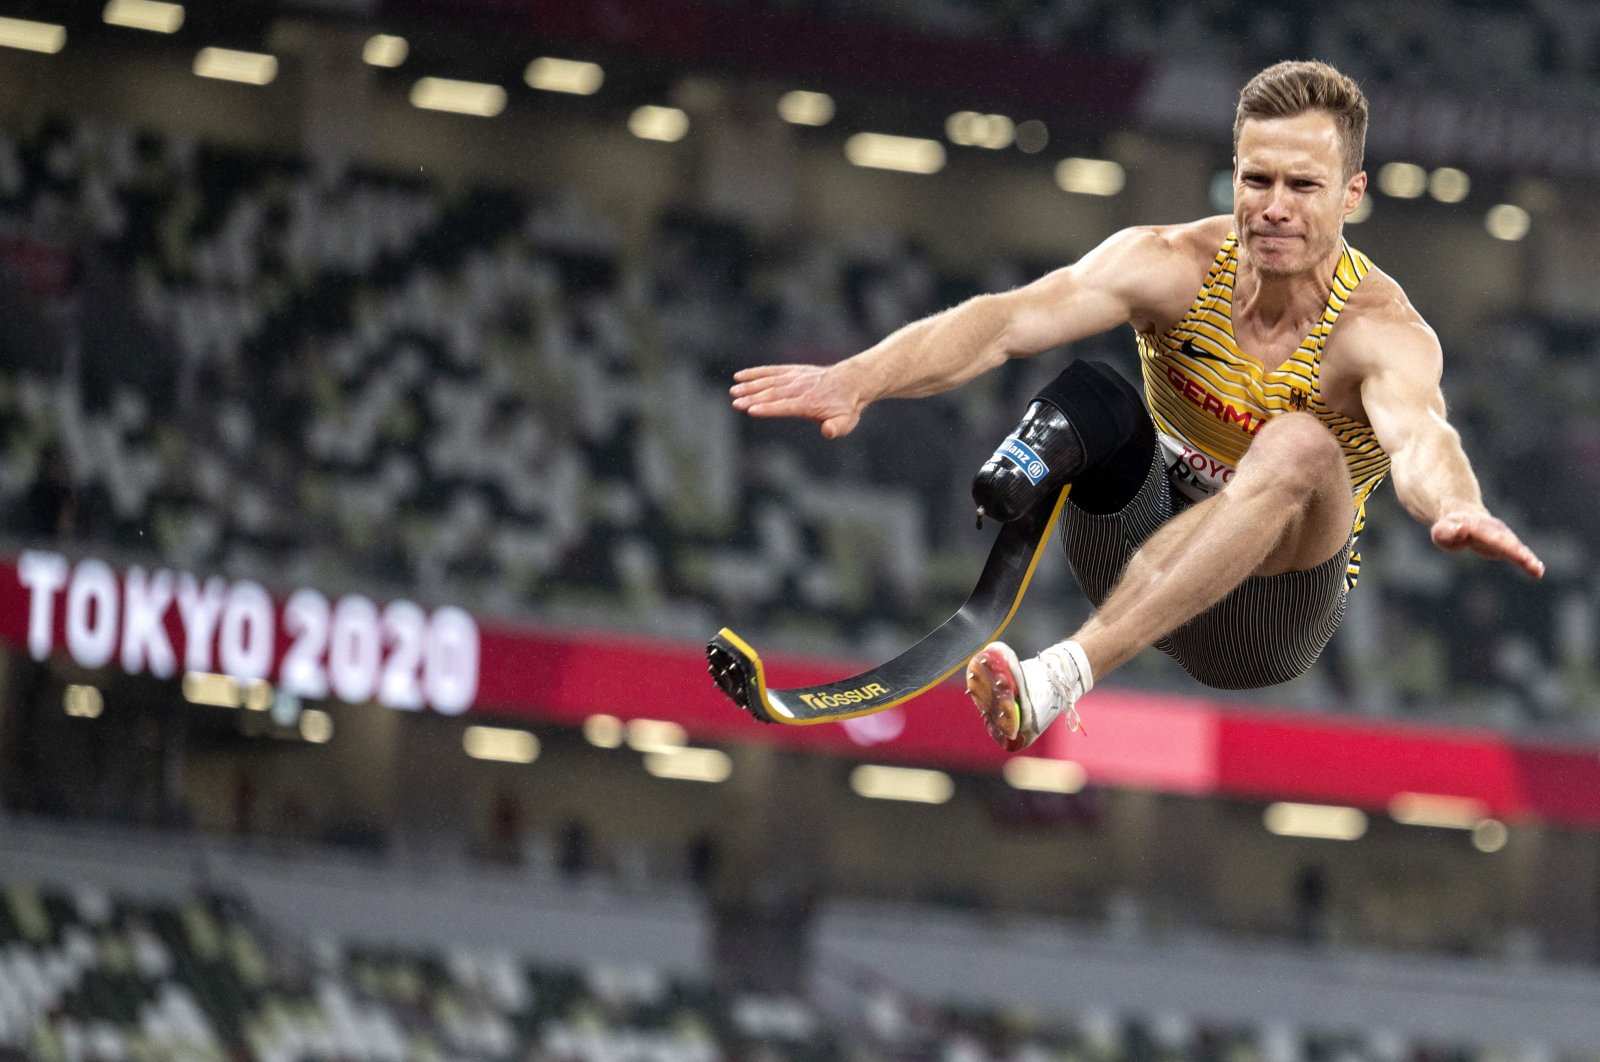 Germany's Markus Rehm competes in the Tokyo 2020 Paralympic men's long jump T64 final at the Olympic Stadium, Tokyo, Japan, Sept. 1, 2021. (AFP Photo)